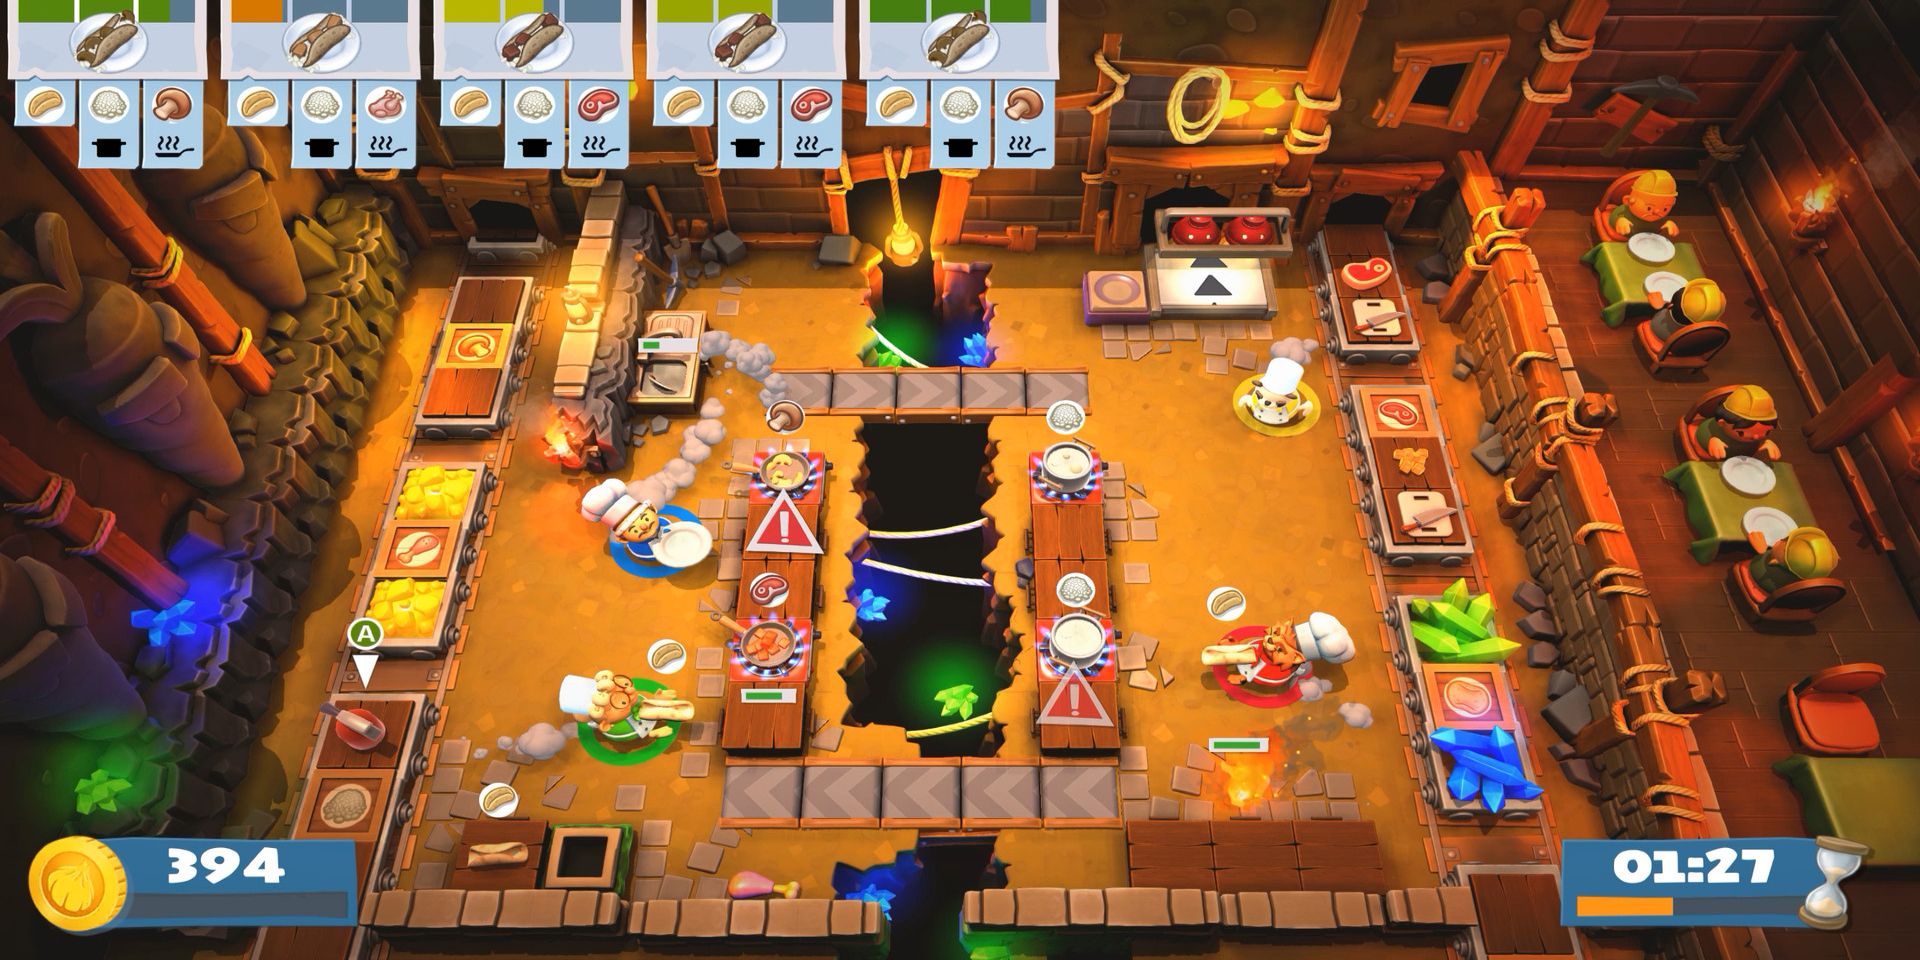 A screenshot of the Nintendo Switch video game Overcooked 2.